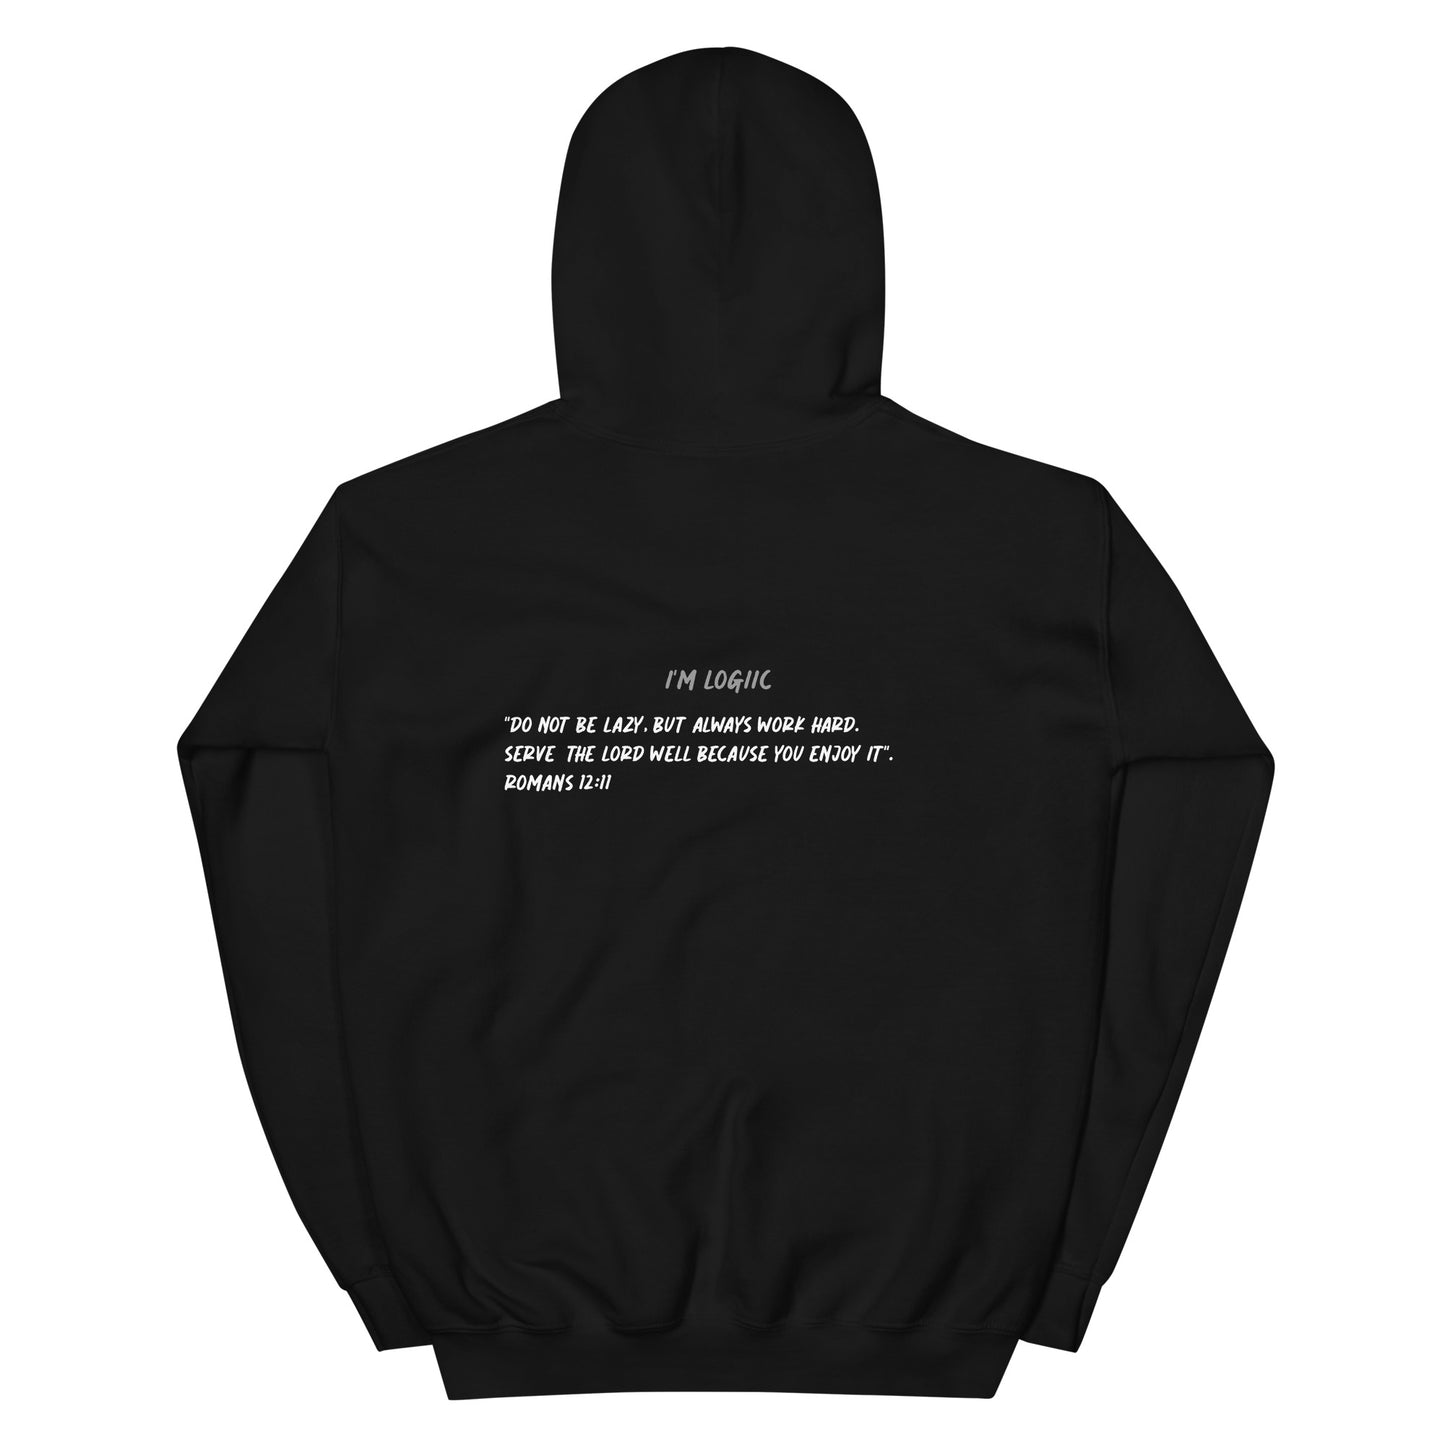 PUSH Embroidered Hoodie - Shirts & Tops